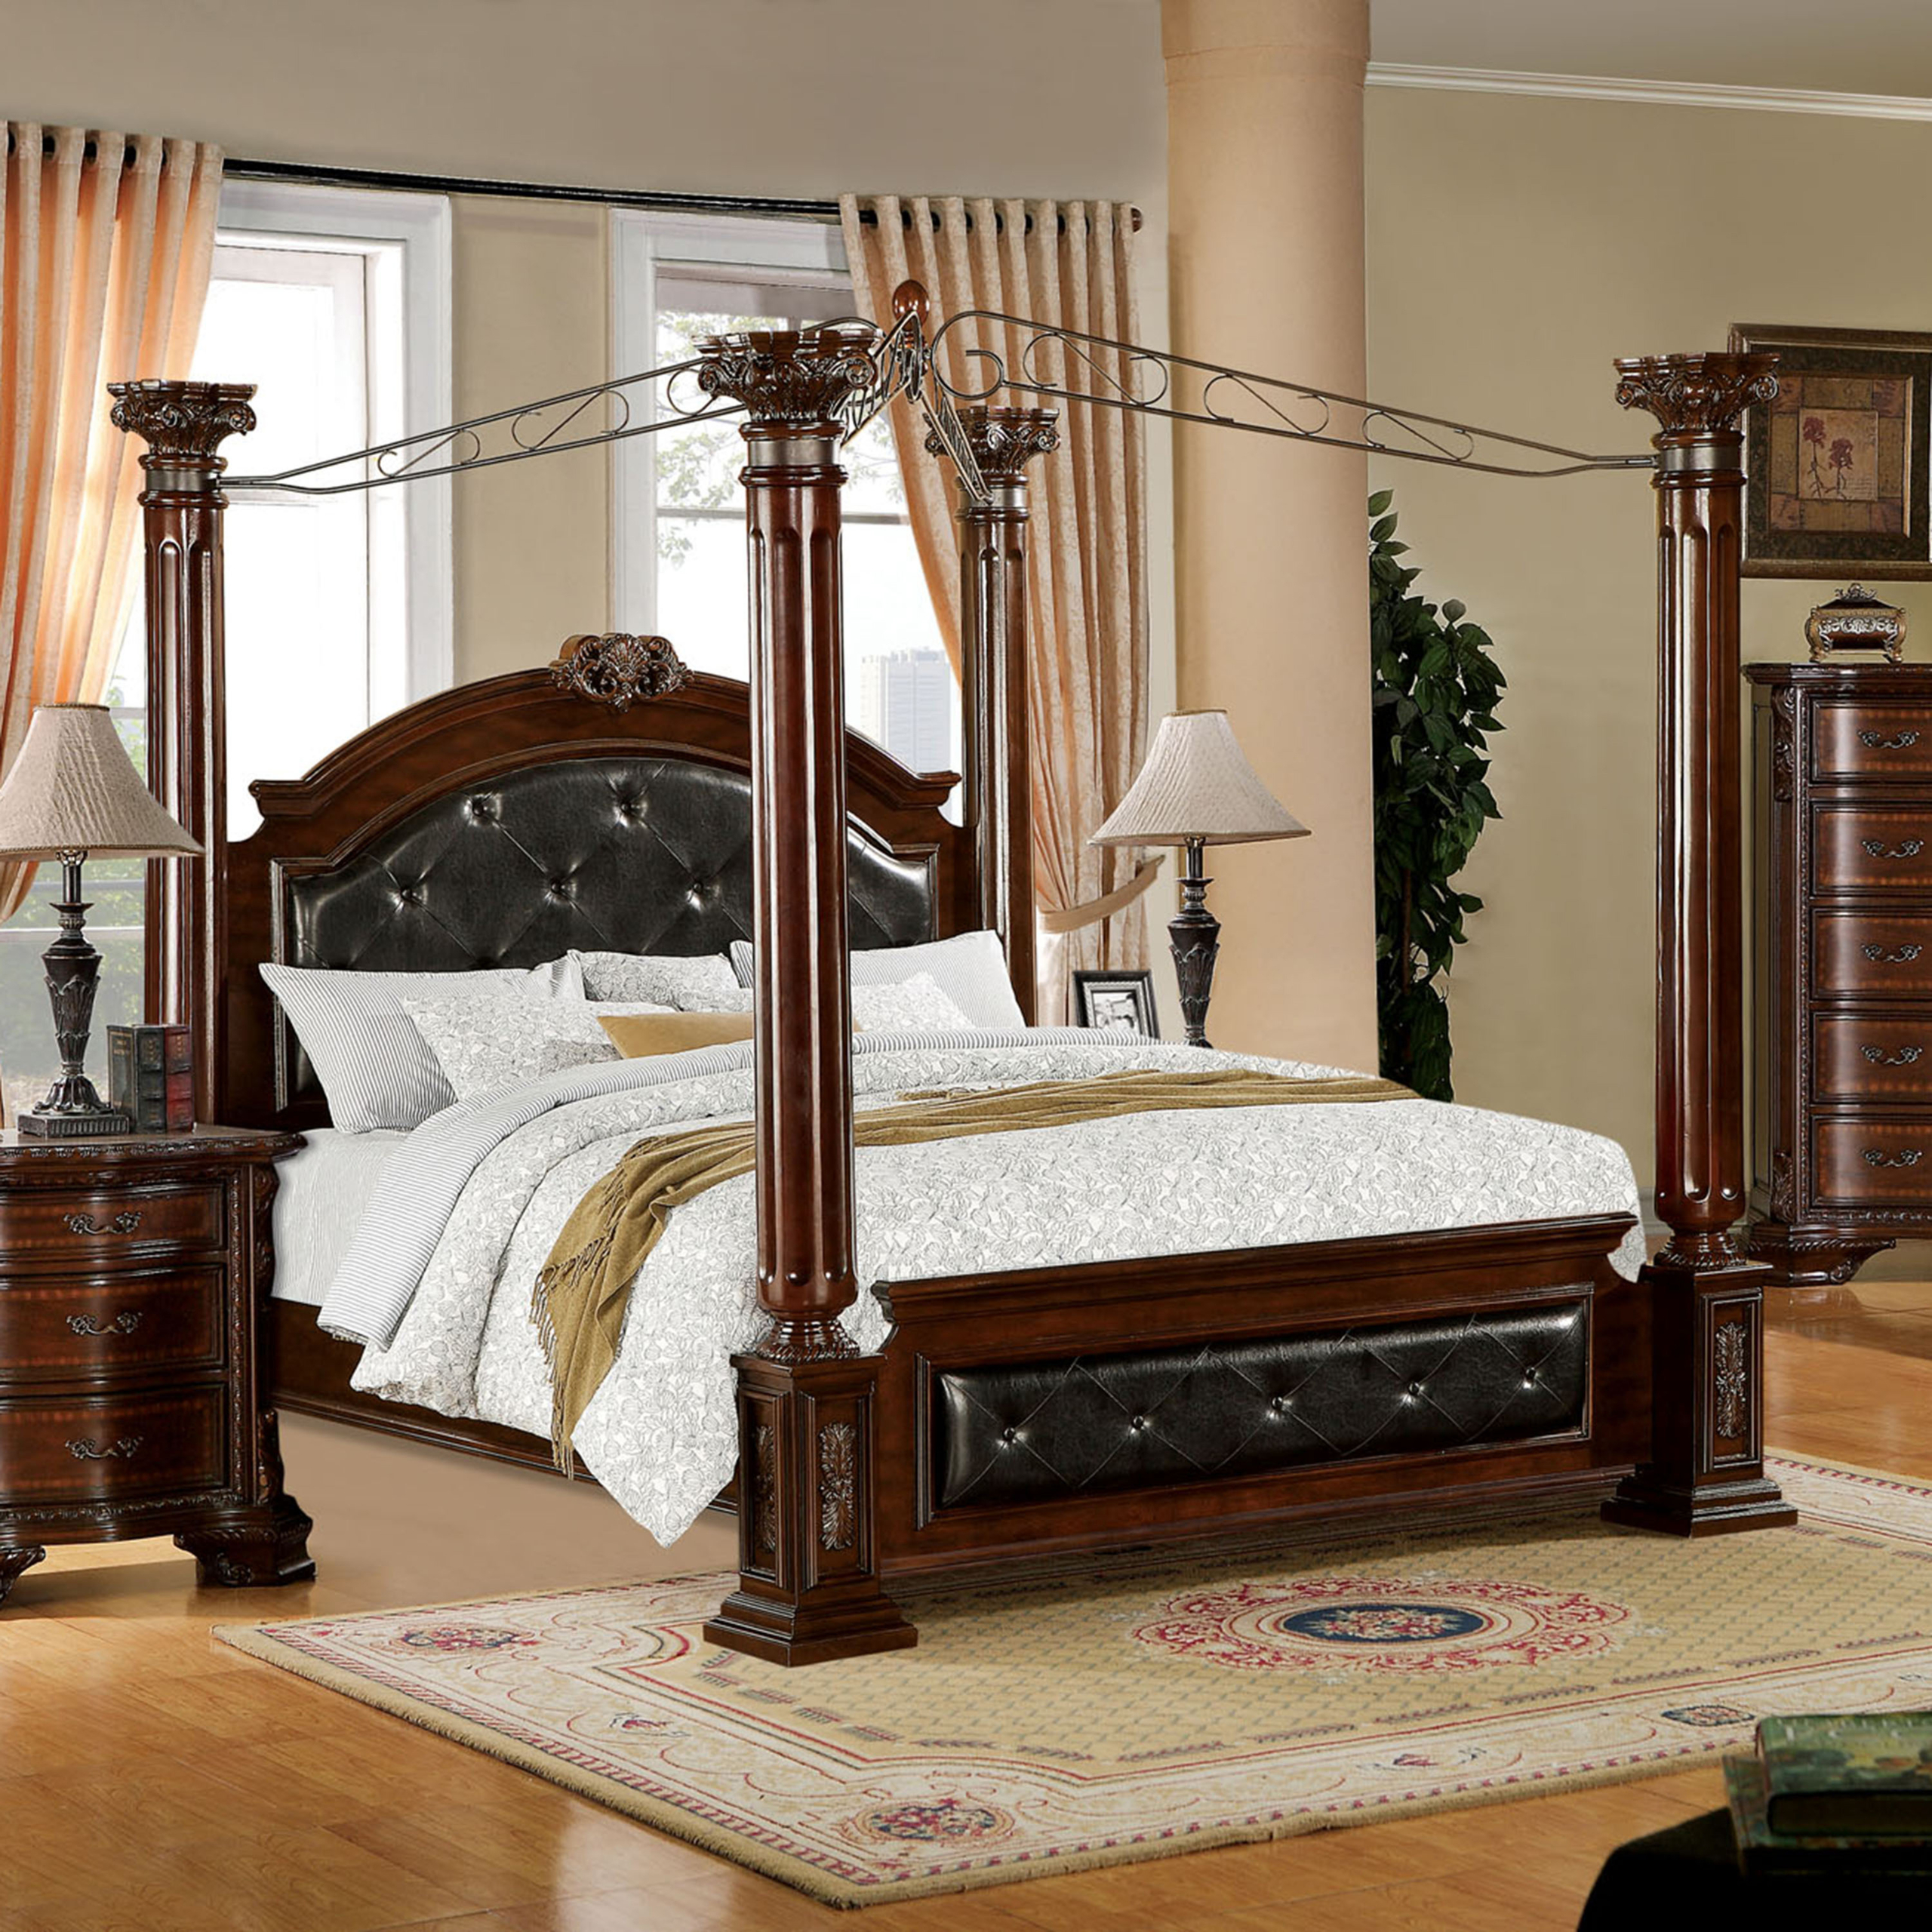 Mandalay Brown Cherry Finish Cal King Size Bed Frame Set